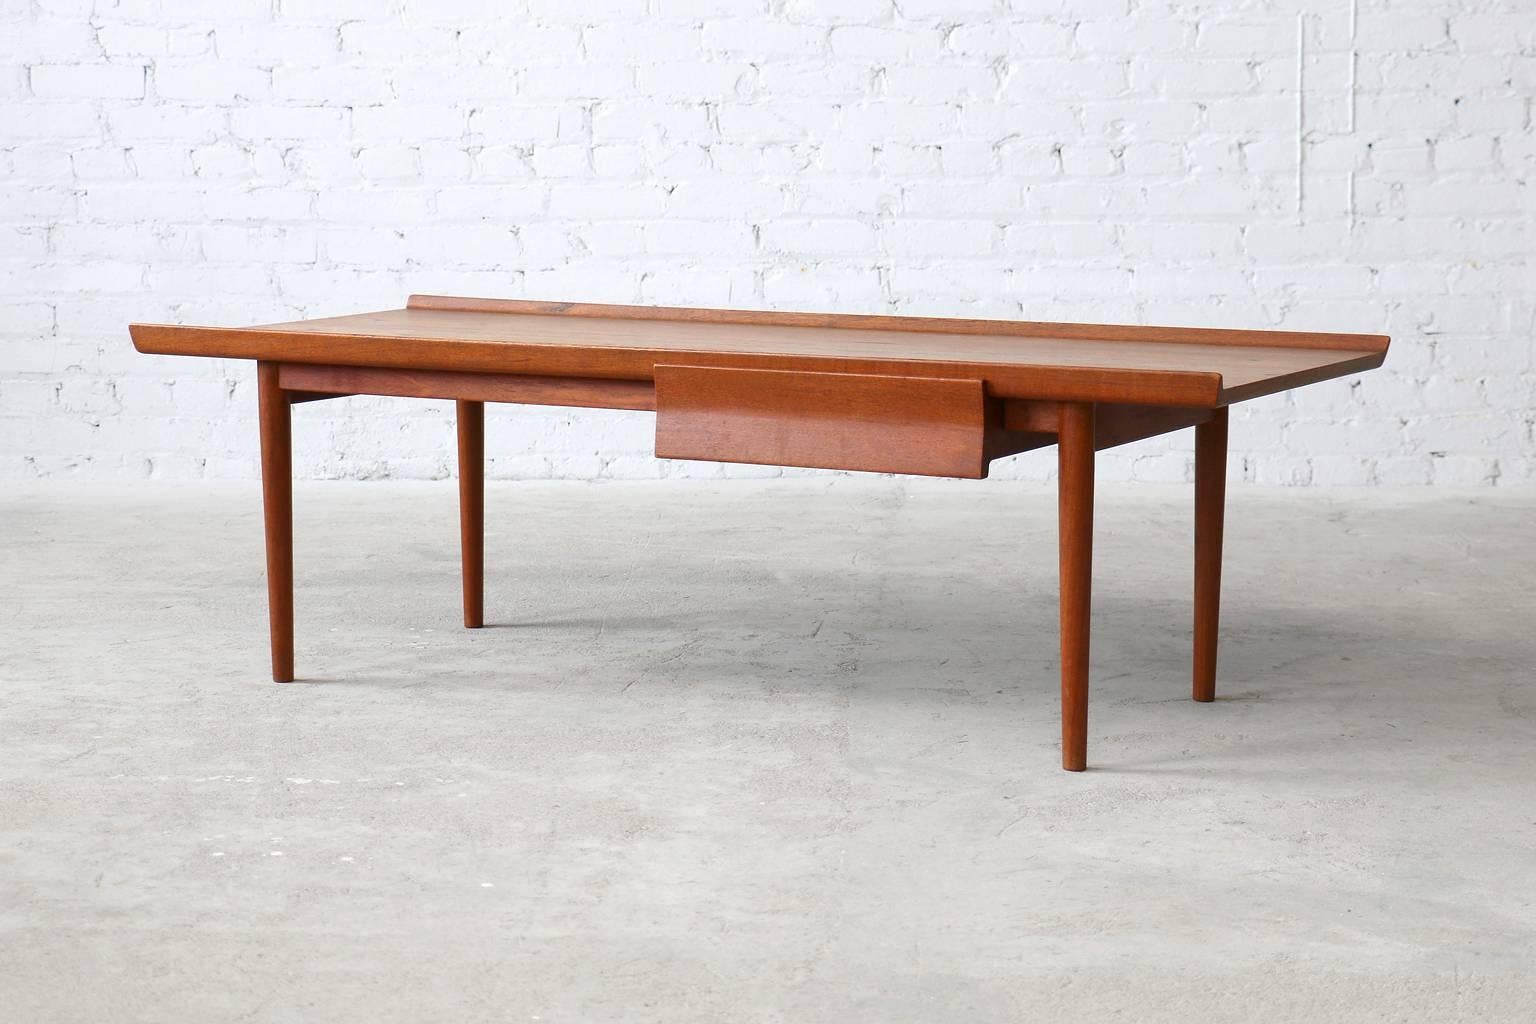 - very rare model
- designed Ca. 1954
- solid teak drawer
- solid teak frame 

A very rare teak coffee table by Finn Juhl for Niels Vodder. The raised lip and angled drawer give this piece it's modern flare. Also features a cantilevered table